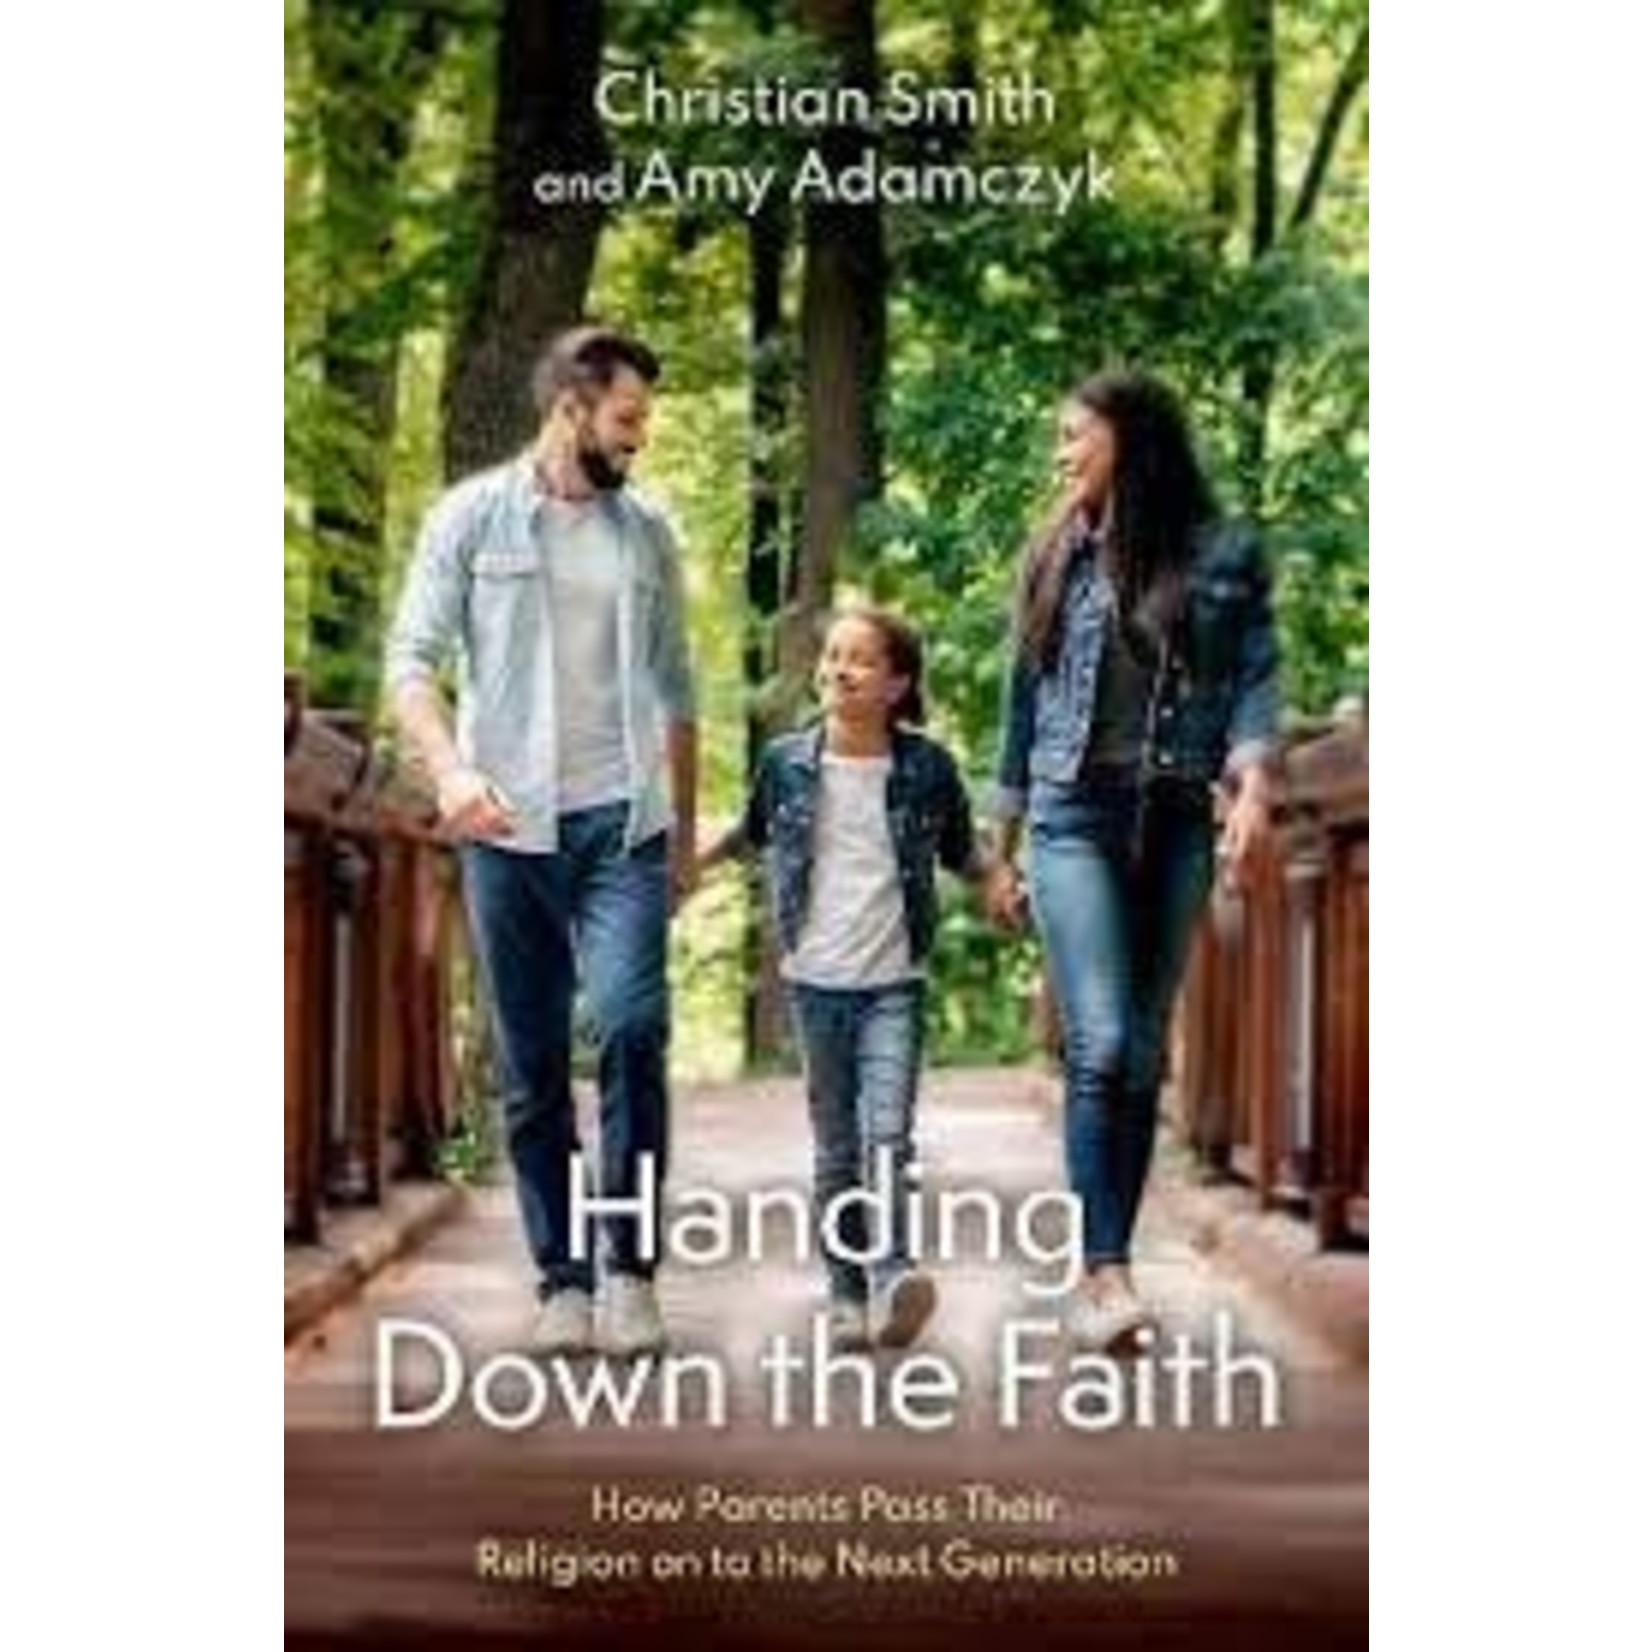 Handing Down the Faith: How Parents Pass Their Religion on to the Next Generation